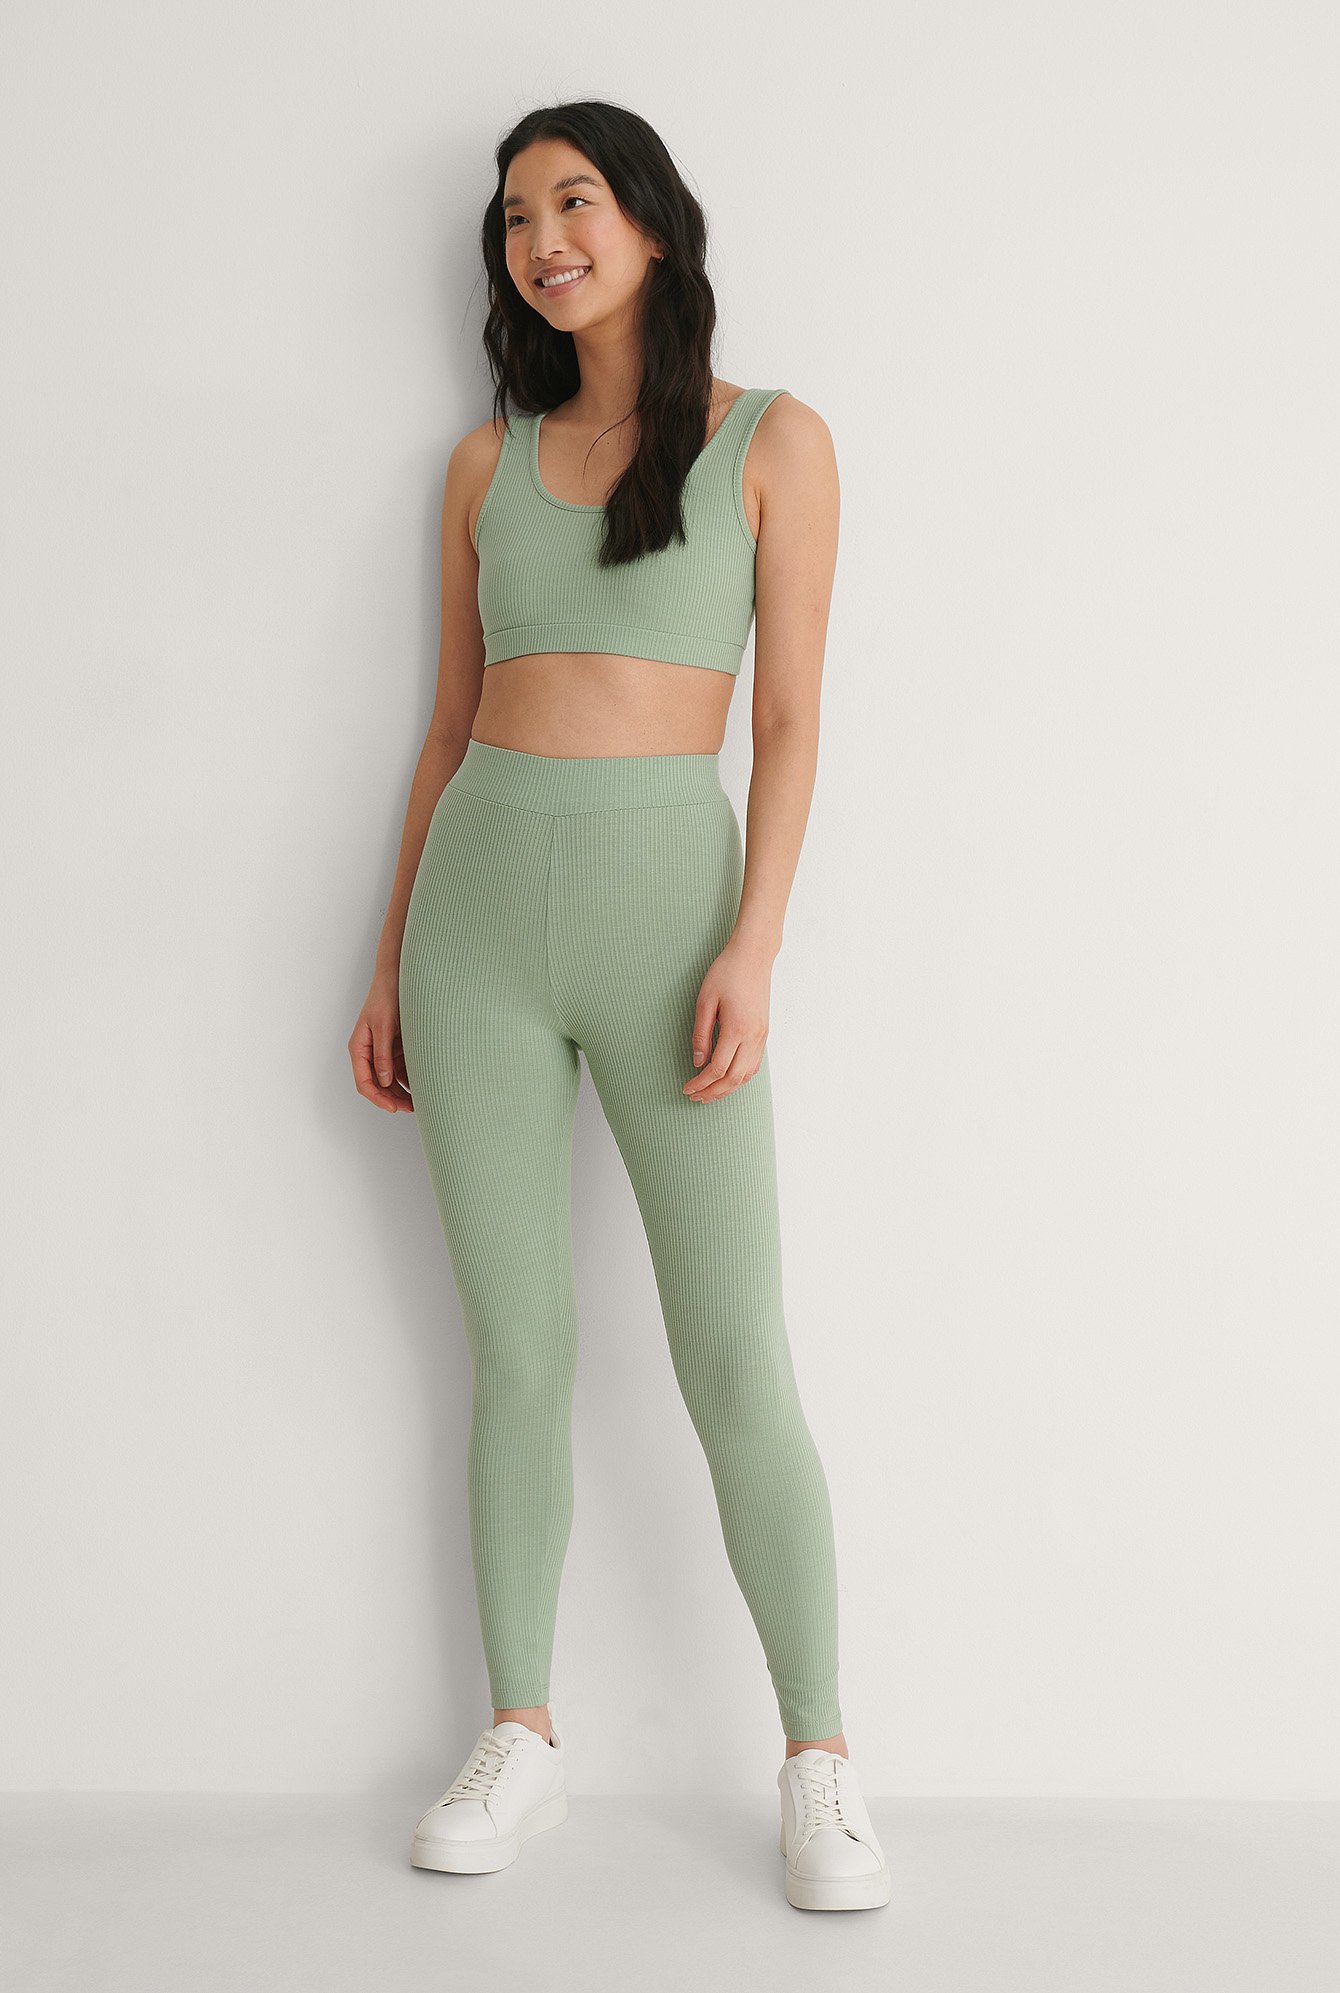 Dusty Green Recycelte Ripp-Strumpfhose mit hoher Taille